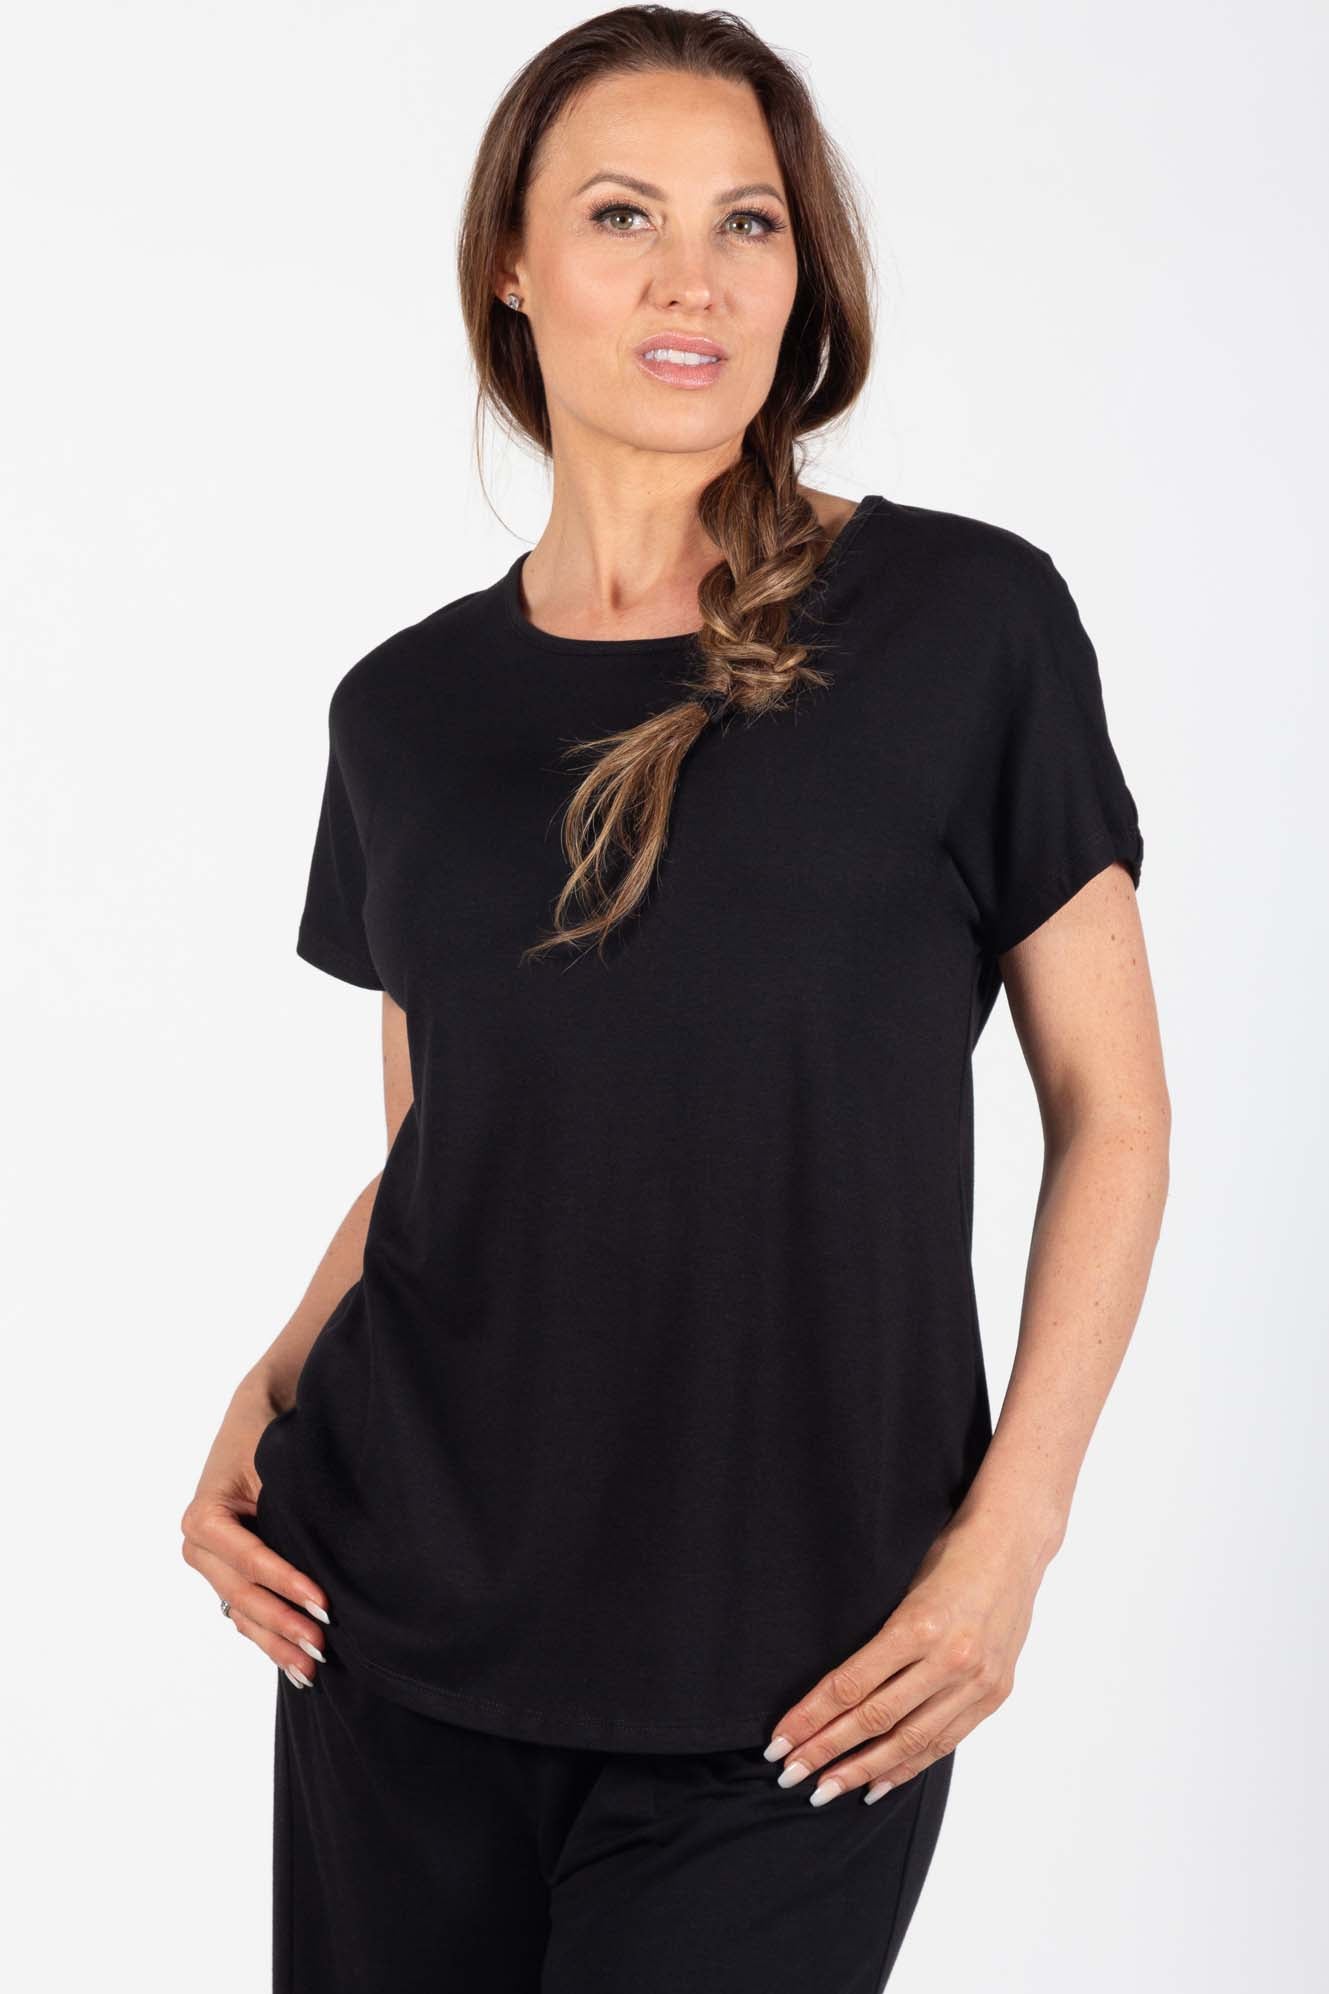 Woman wearing the Callie Top by Pure Essence in Black, a basic t-shirt, standing in front of a white background